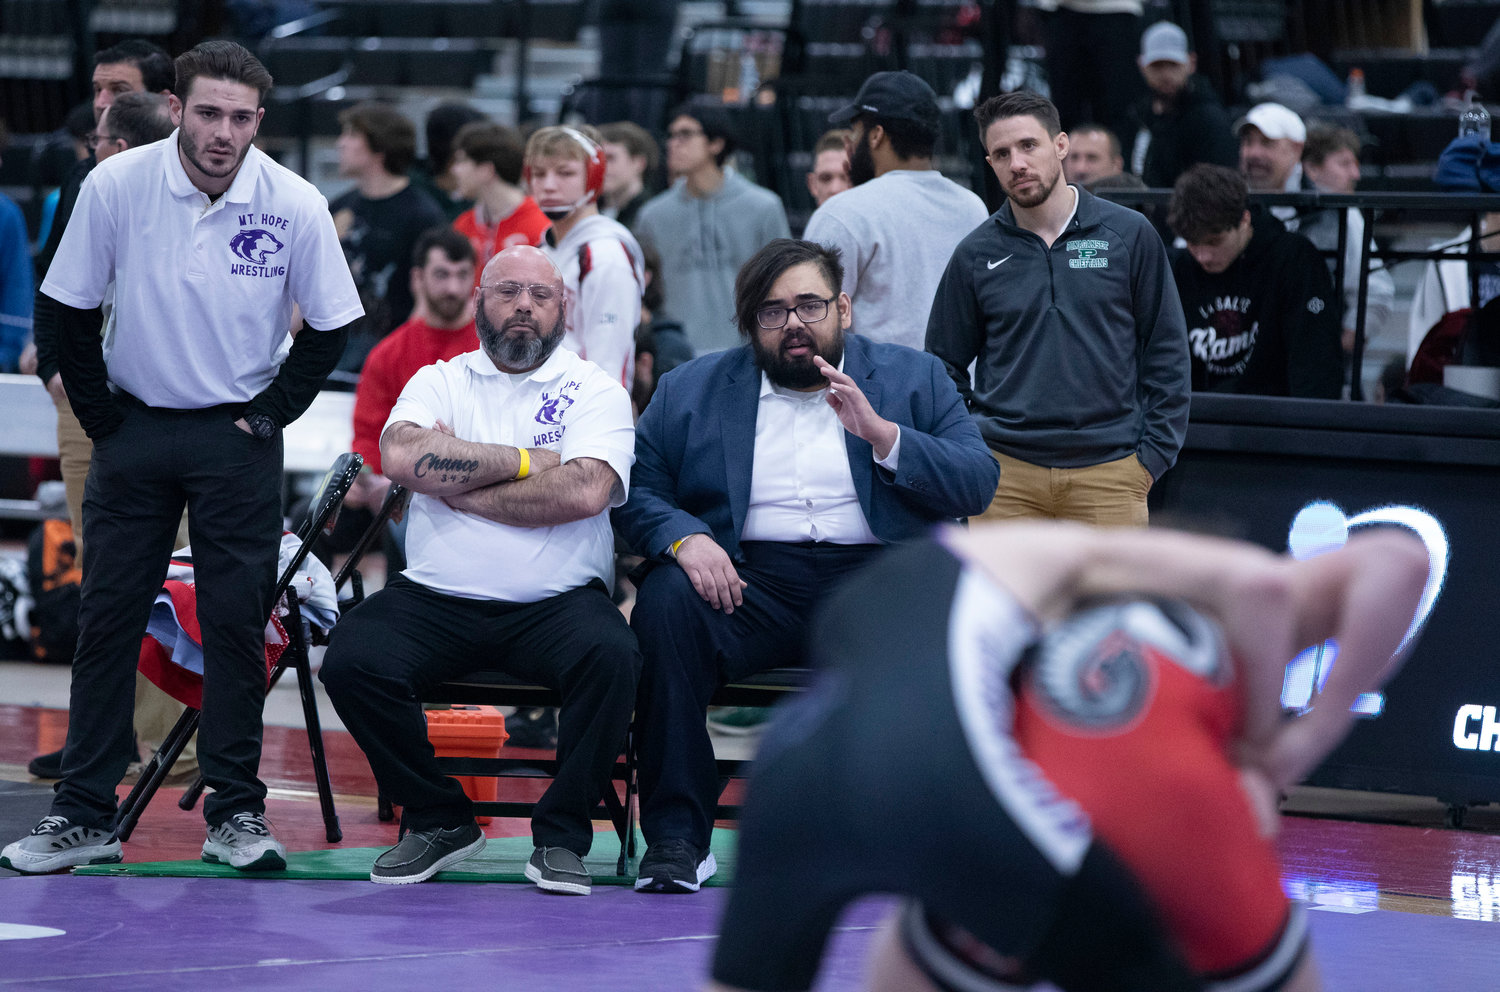 Assistant coaches Trevor King (left), Brad Oliver and head coach Ryan Fazzi look on during Andrew McCarthy’s semifinals match against Stone Farnsworth of Coventry.